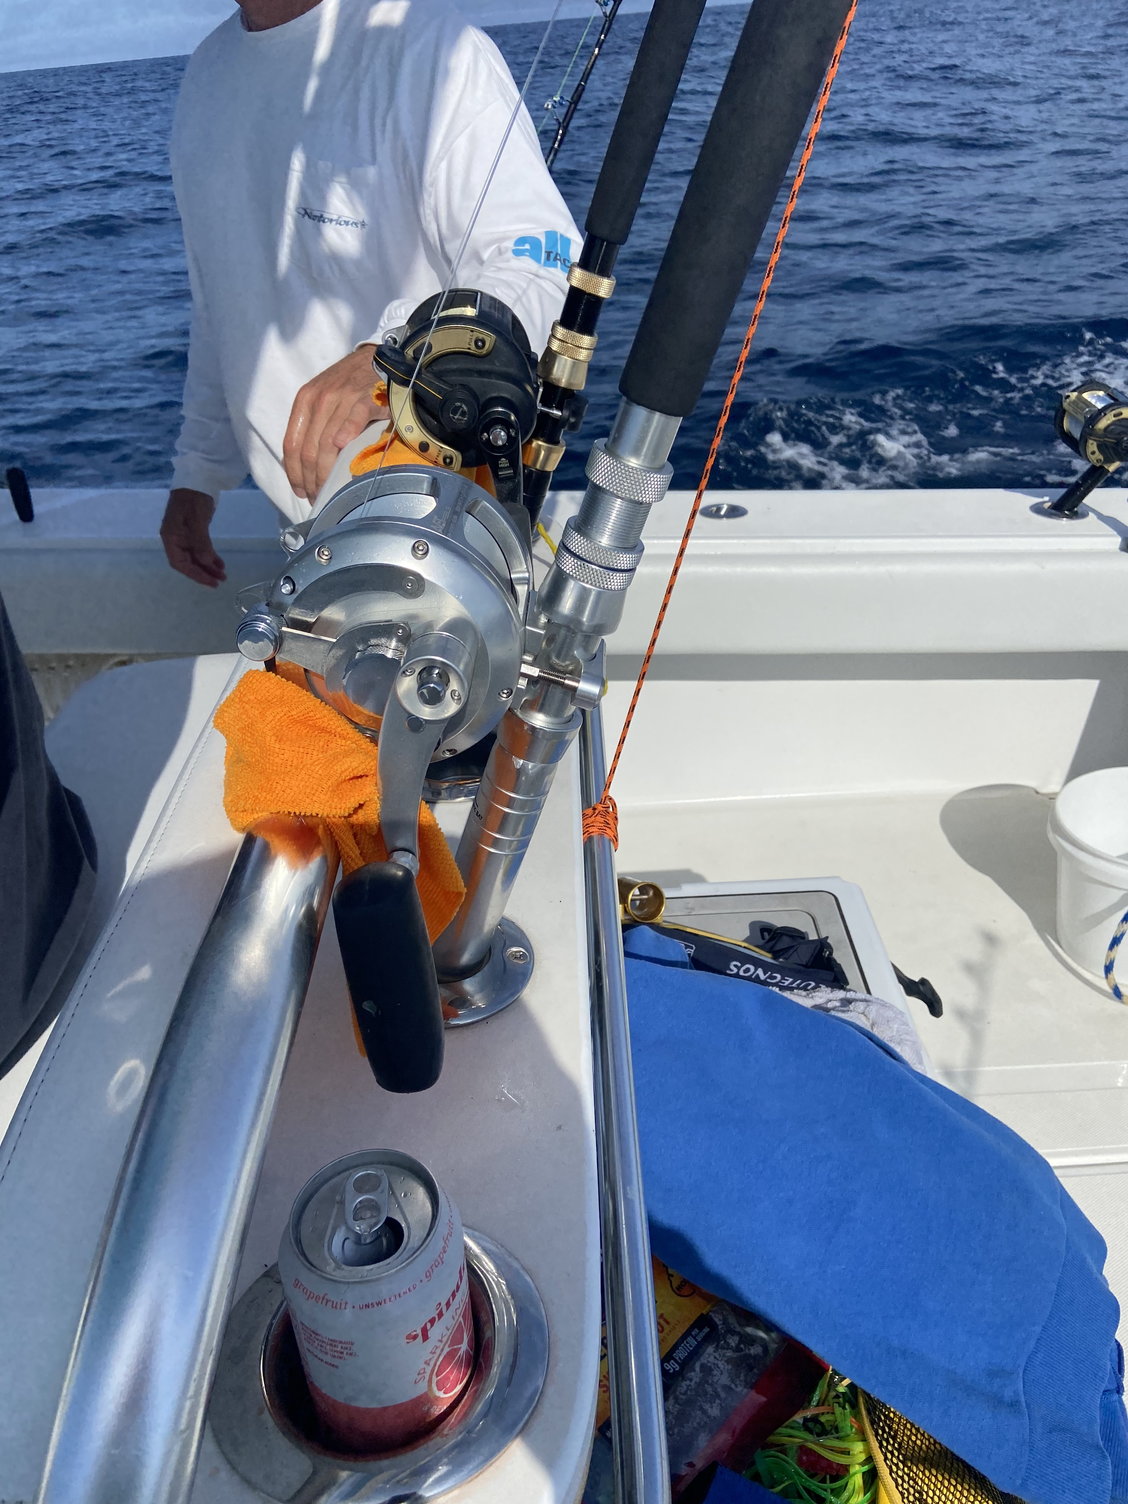 Leaning post rod holder issue - The Hull Truth - Boating and